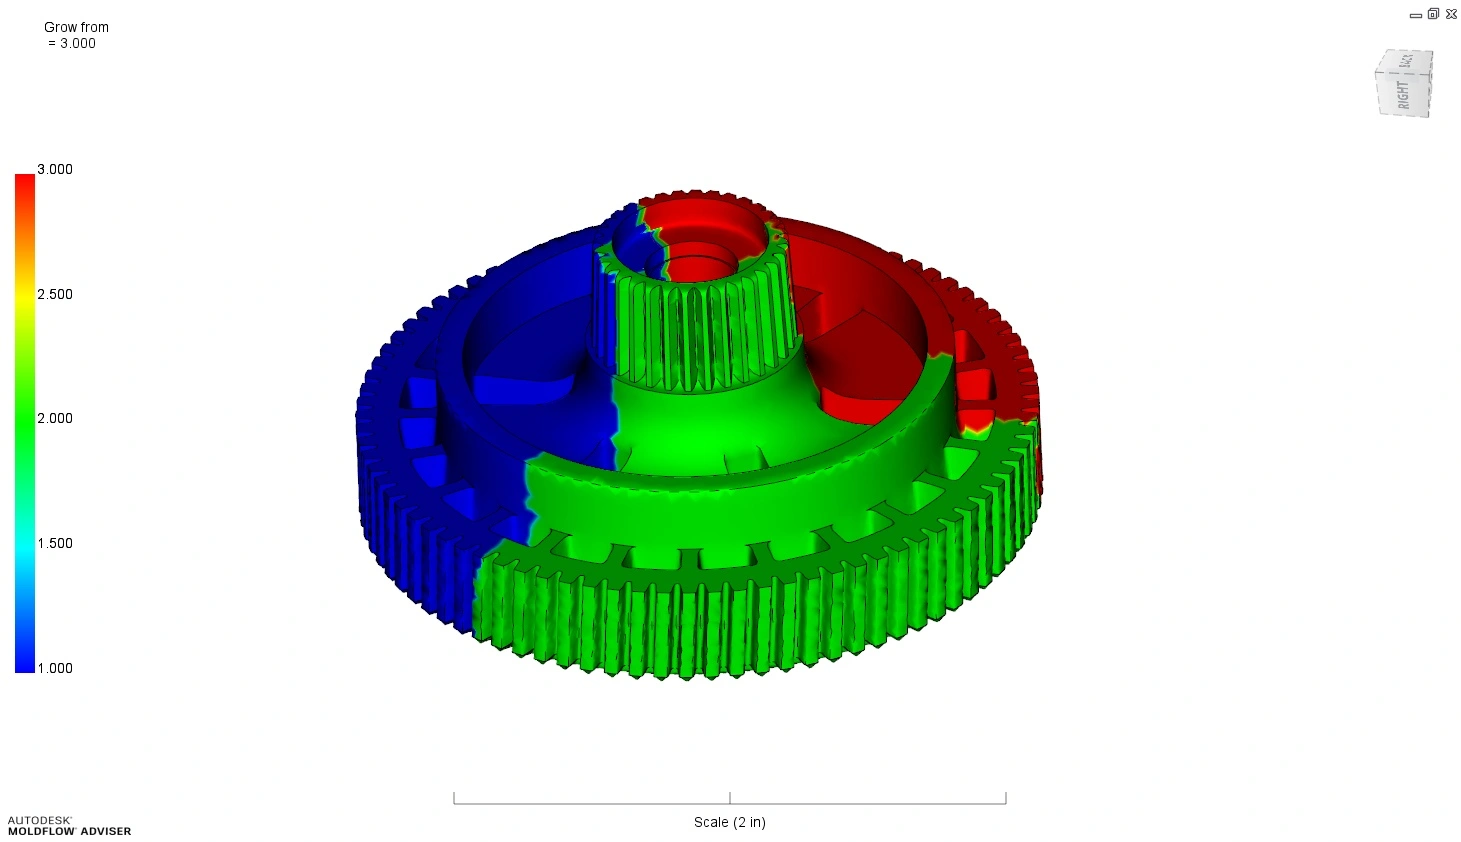 A 3d image of a green and red inteval gear